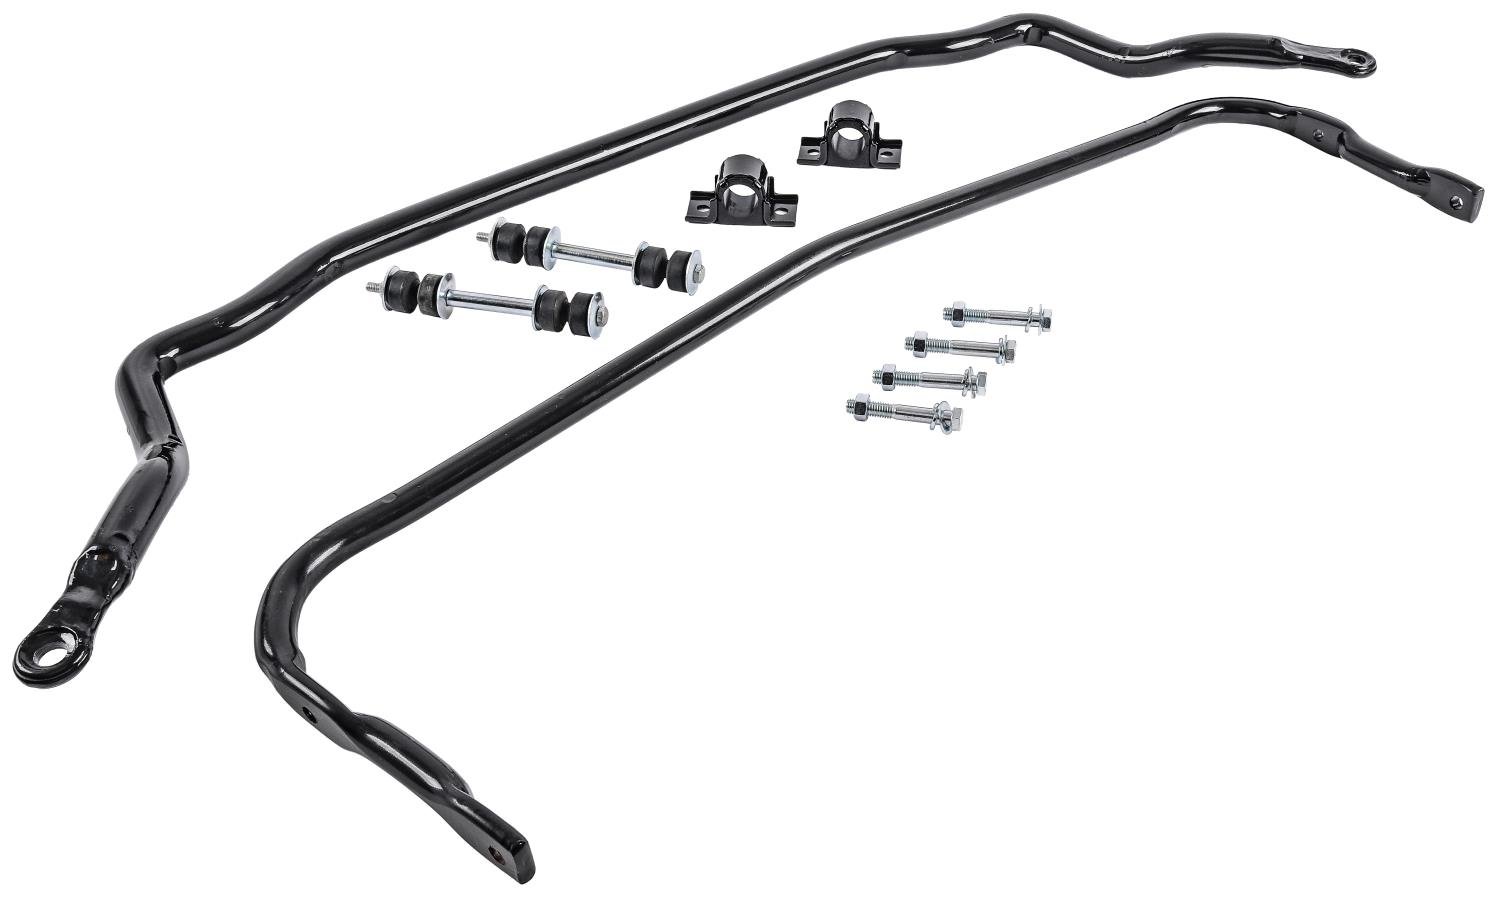 Front and Rear Sway Bar Kit Fits Select 1964-1972 Buick, Chevrolet, Oldsmobile, Pontiac Models